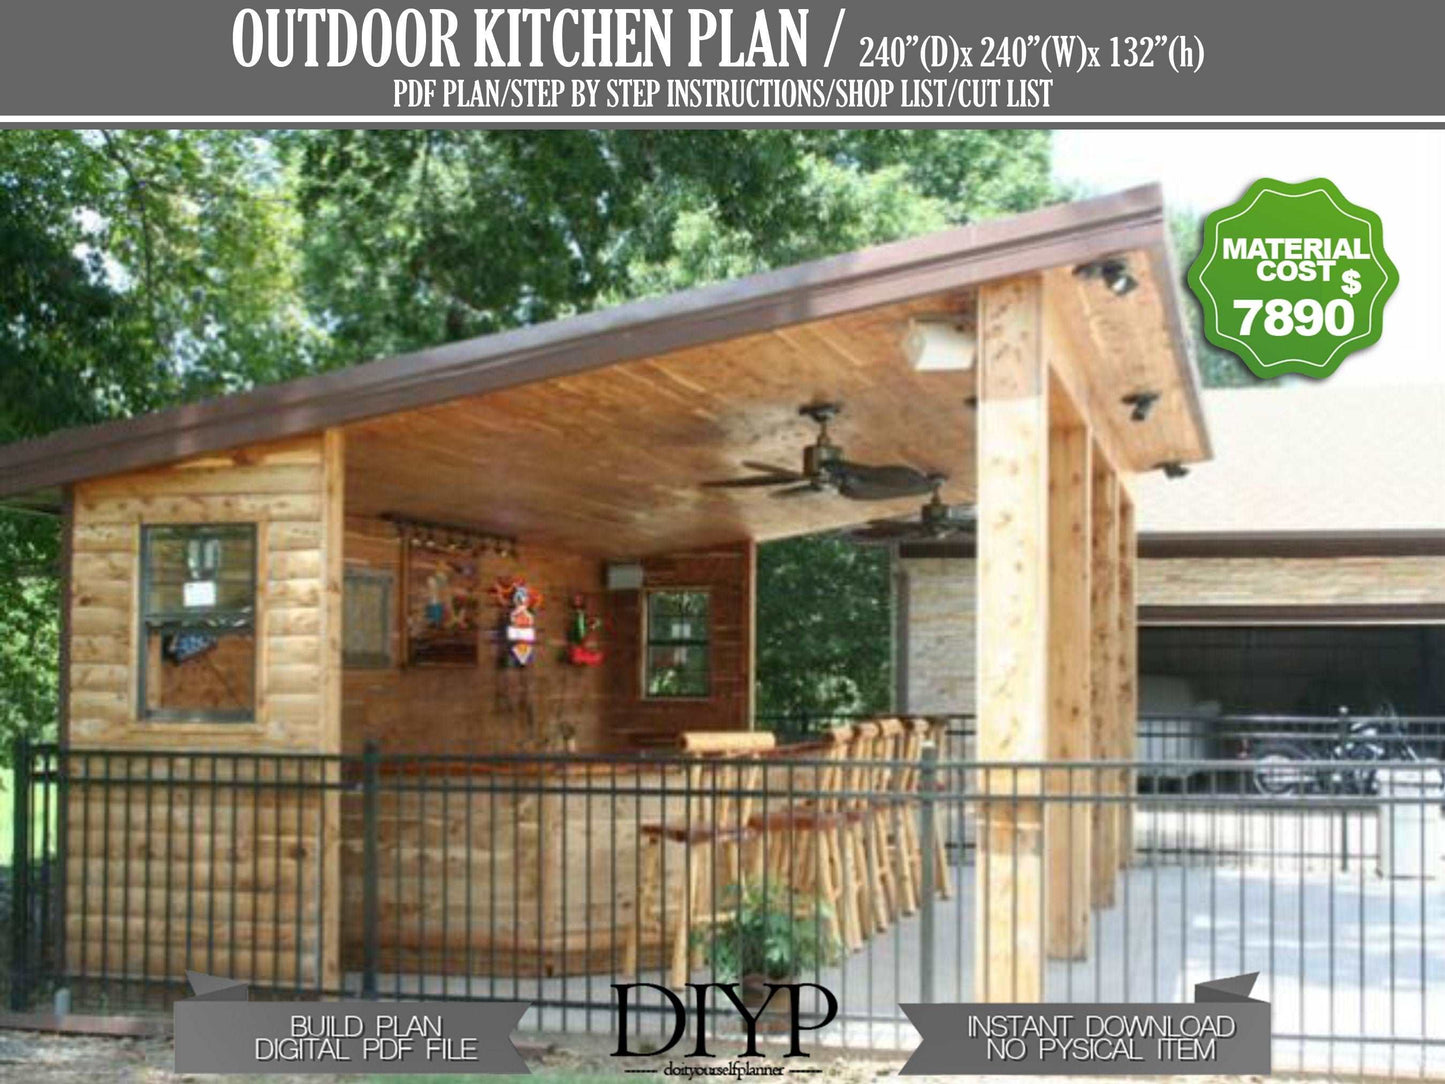 20x20 Outdoor Kitchen Plans , Patio Kitchen , Open-Air Kitchen , Outdoor Dining Patio , Backyard Party Pavilion - Outdoor Bar